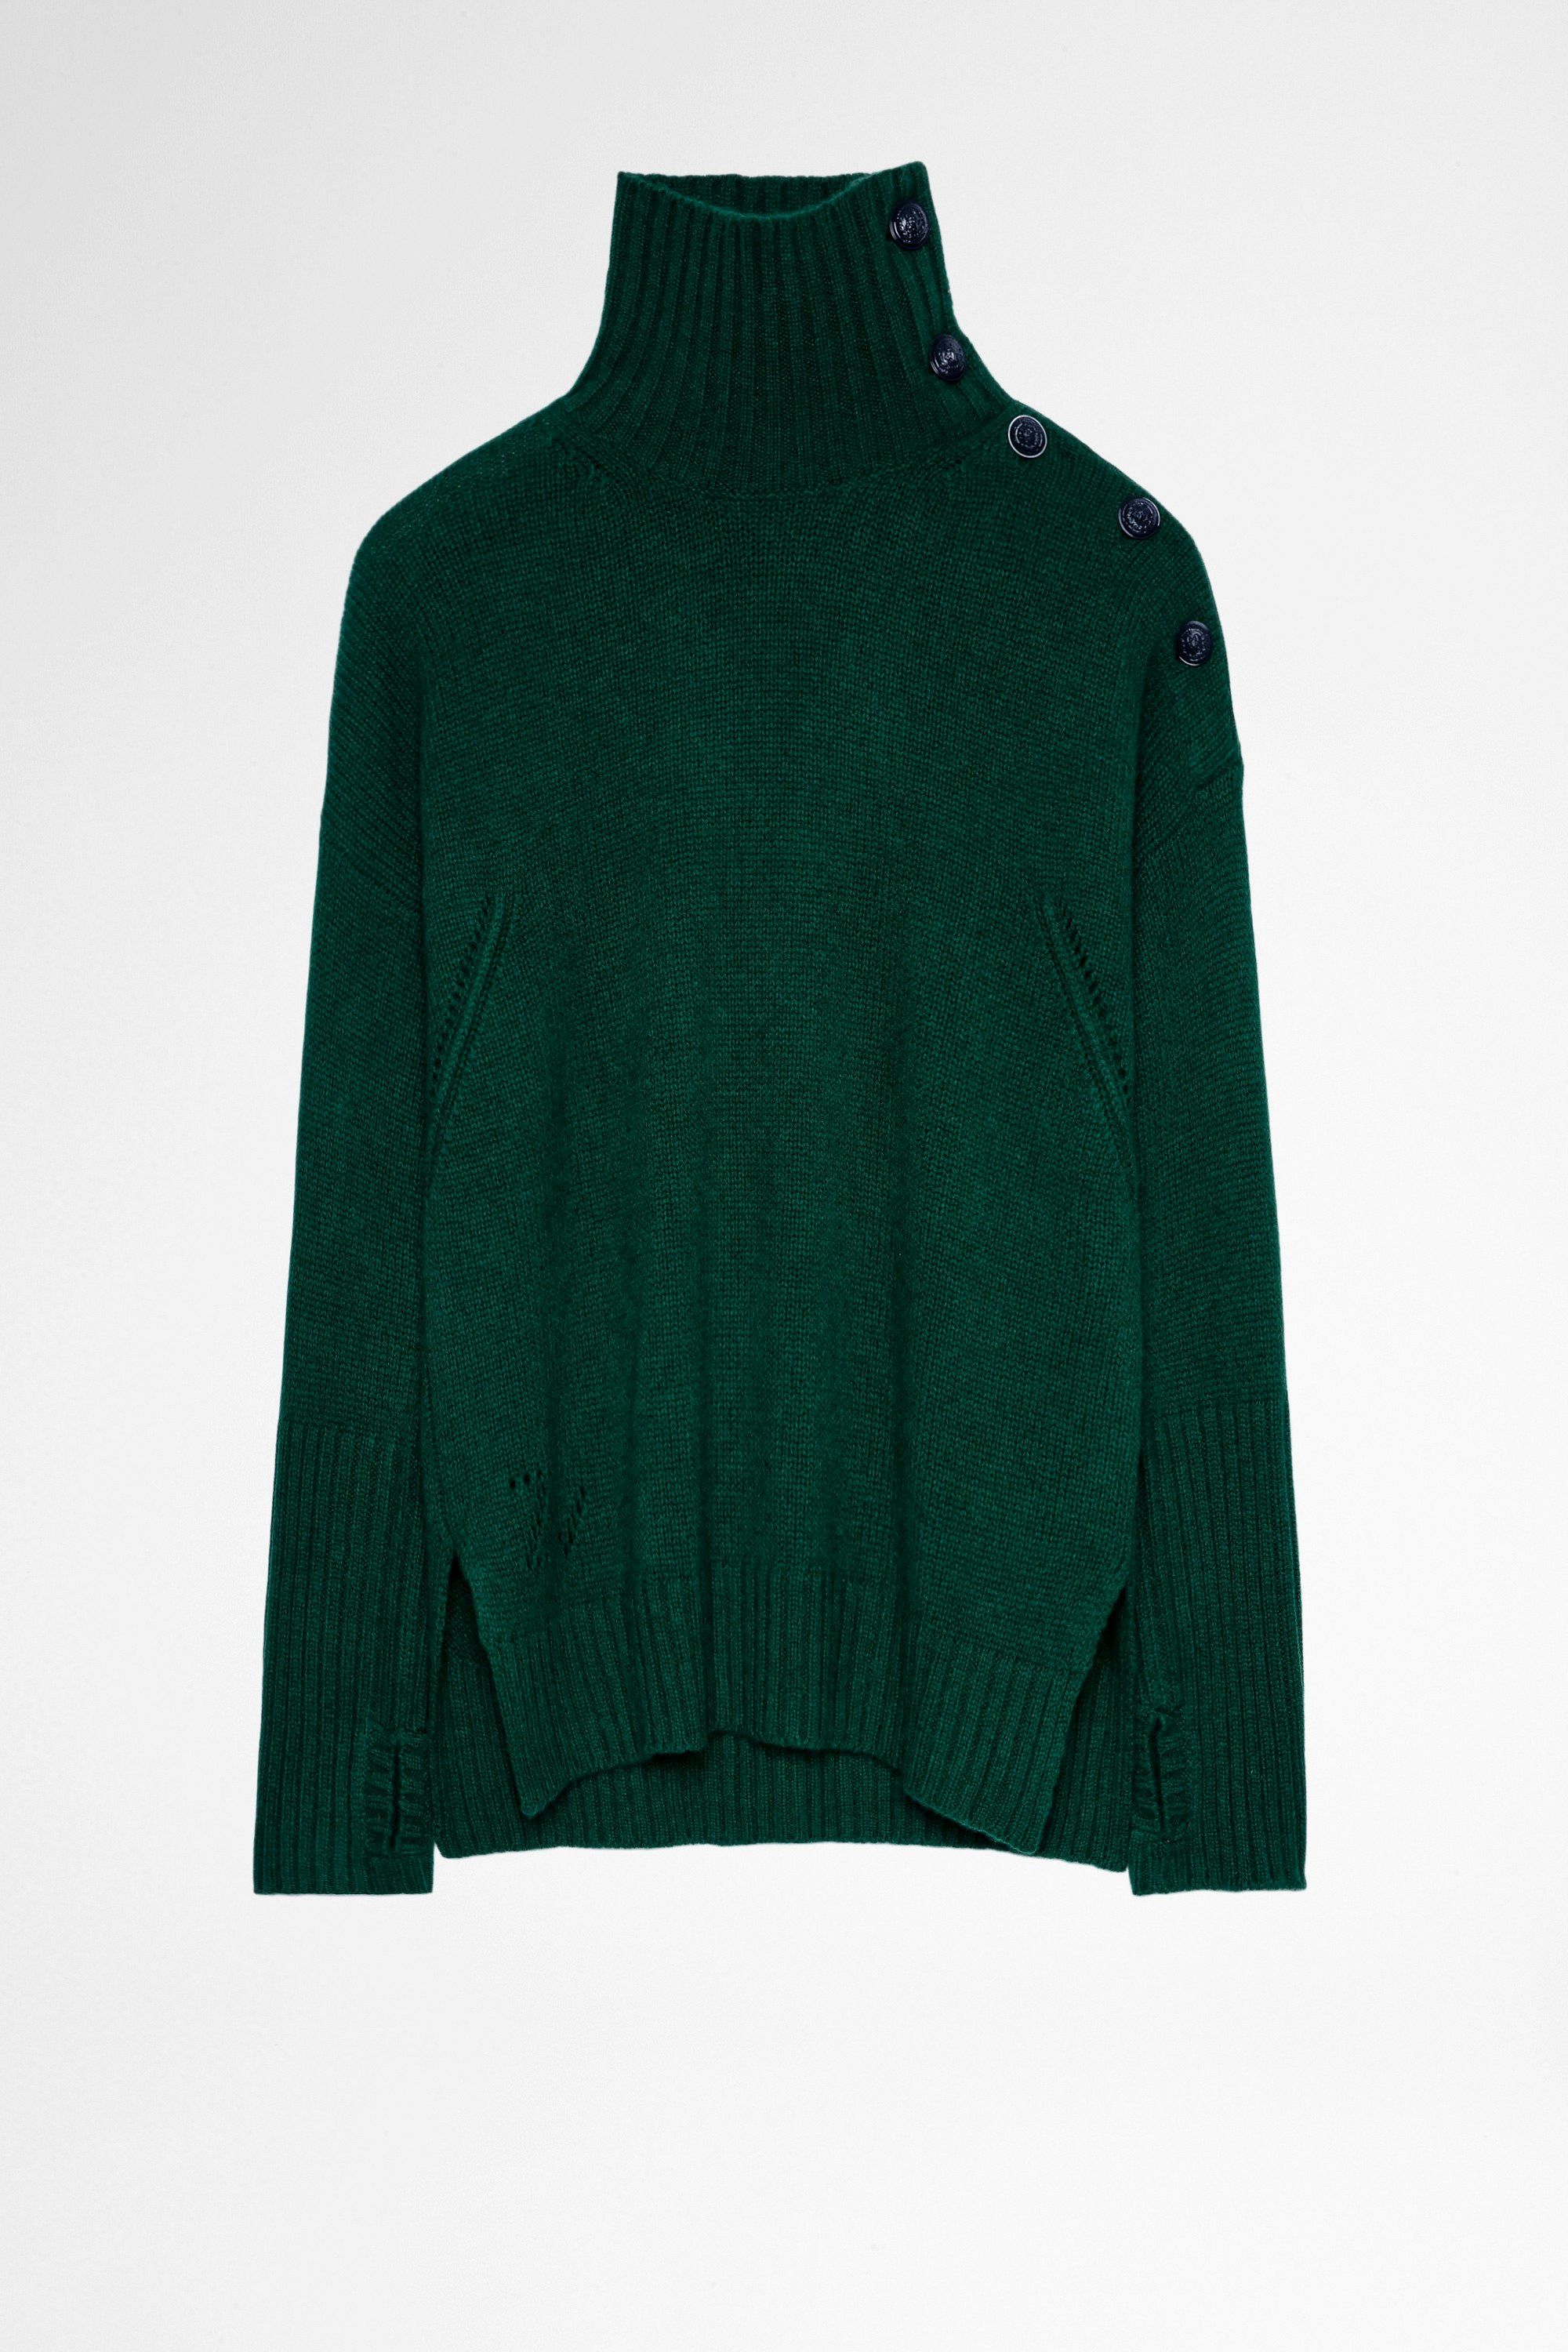 Alma Cashmere Jumper Green wool and cashmere turtleneck sweater with contrasting buttons  